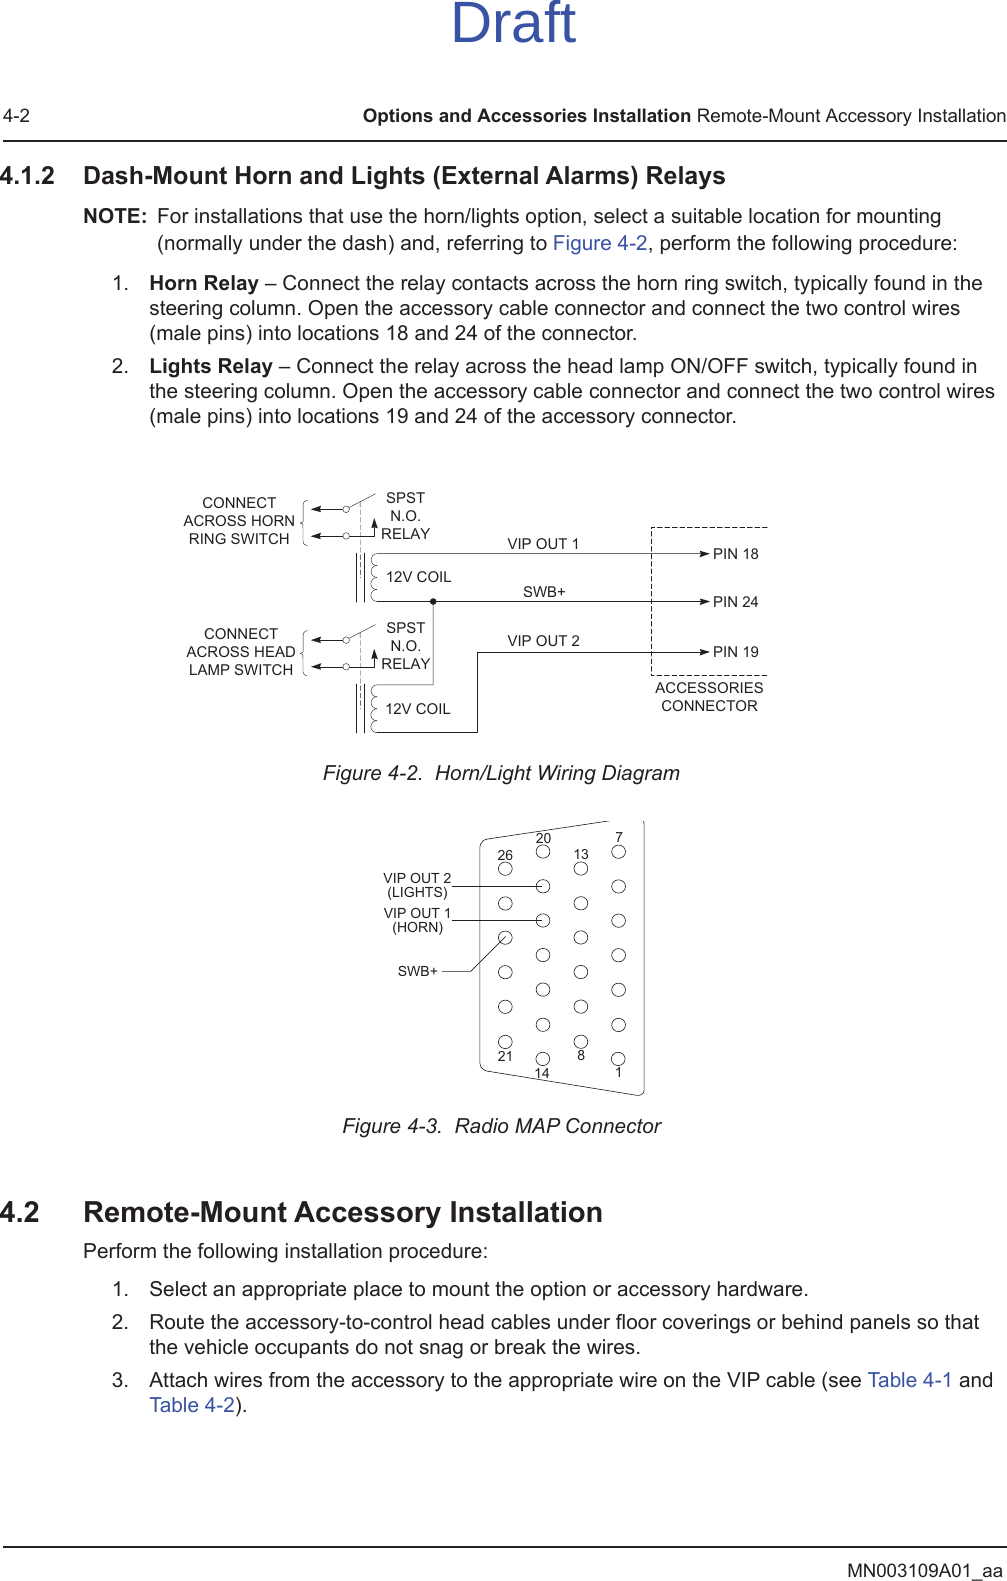 MN003109A01_aa4-2 Options and Accessories Installation Remote-Mount Accessory Installation4.1.2 Dash-Mount Horn and Lights (External Alarms) RelaysNOTE: For installations that use the horn/lights option, select a suitable location for mounting (normally under the dash) and, referring to Figure 4-2, perform the following procedure:1. Horn Relay – Connect the relay contacts across the horn ring switch, typically found in the steering column. Open the accessory cable connector and connect the two control wires (male pins) into locations 18 and 24 of the connector.2. Lights Relay – Connect the relay across the head lamp ON/OFF switch, typically found in the steering column. Open the accessory cable connector and connect the two control wires (male pins) into locations 19 and 24 of the accessory connector.Figure 4-2.  Horn/Light Wiring Diagram Figure 4-3.  Radio MAP Connector4.2 Remote-Mount Accessory InstallationPerform the following installation procedure:1. Select an appropriate place to mount the option or accessory hardware.2. Route the accessory-to-control head cables under floor coverings or behind panels so that the vehicle occupants do not snag or break the wires.3. Attach wires from the accessory to the appropriate wire on the VIP cable (see Table 4-1 and Table 4-2).CONNECTACROSS HORNRING SWITCHCONNECTACROSS HEADLAMP SWITCHSPSTN.O.RELAY12V COIL12V COILVIP OUT 1SWB+VIP OUT 2SPSTN.O.RELAYACCESSORIESCONNECTORPIN 18PIN 24PIN 19SWB+VIP OUT 2(LIGHTS)VIP OUT 1(HORN)1781413202126Draft